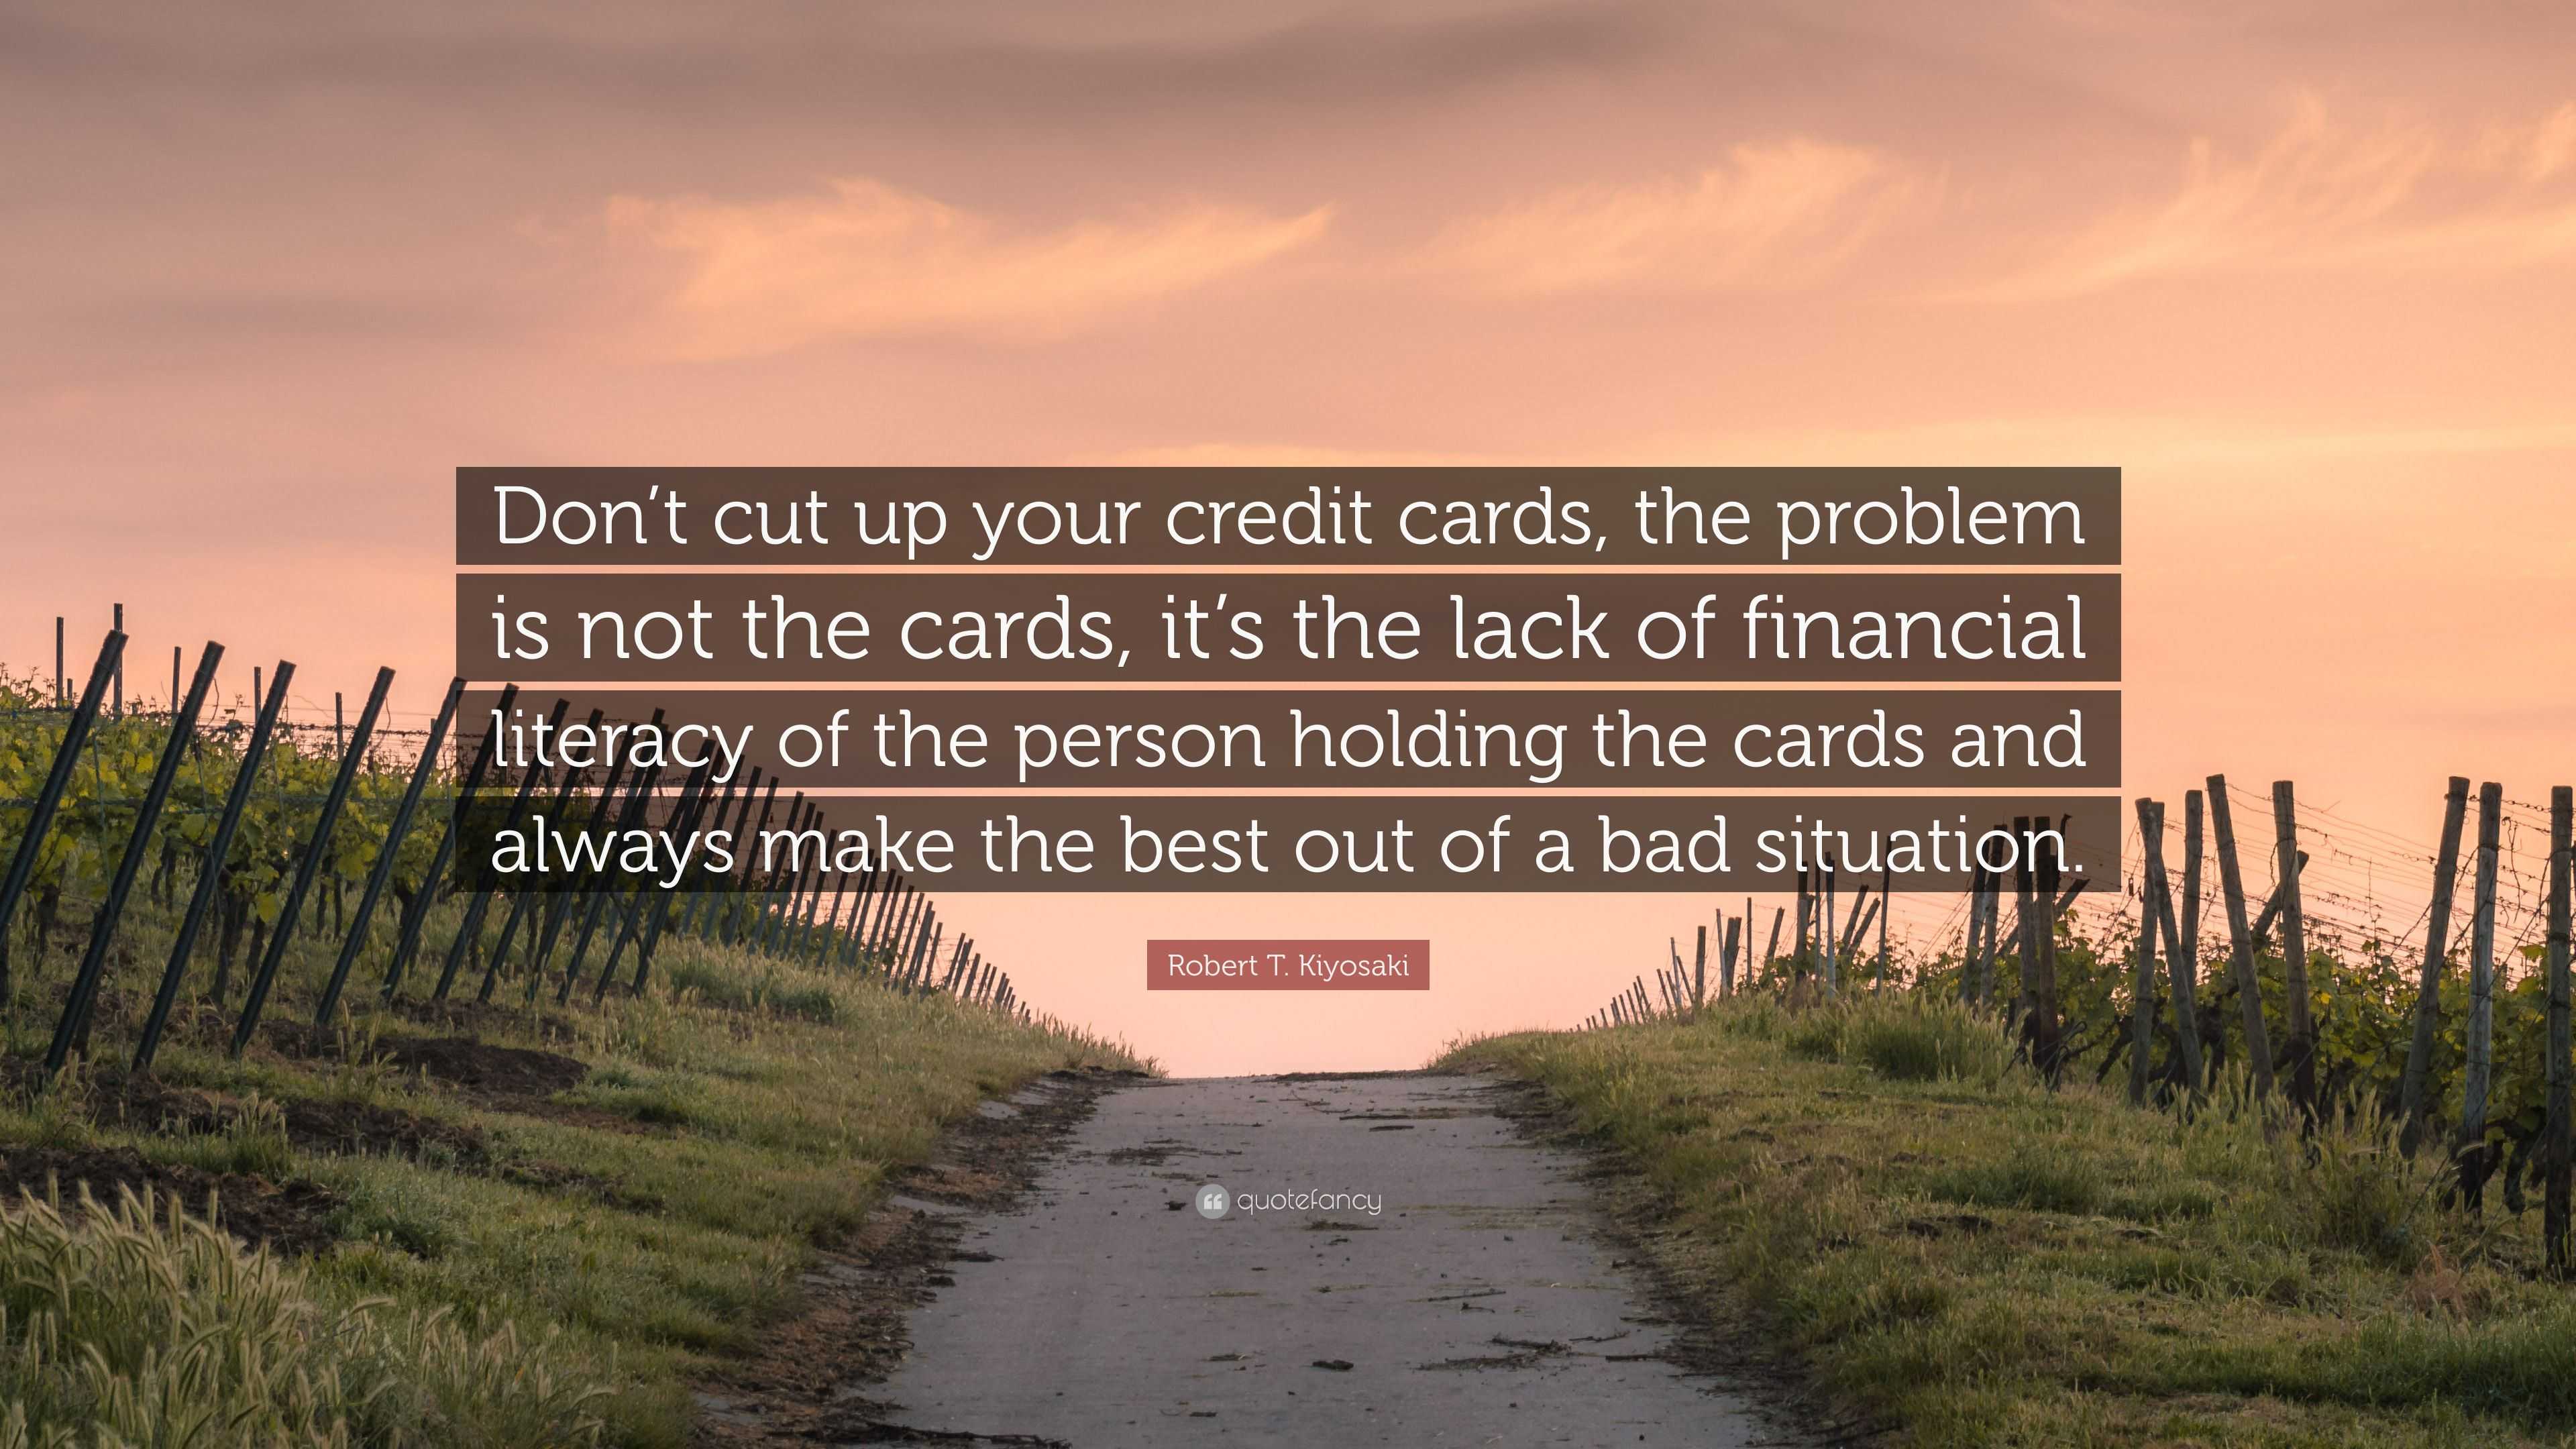 Robert T Kiyosaki Quote Don T Cut Up Your Credit Cards The Problem Is Not The Cards It S The Lack Of Financial Literacy Of The Person Holding